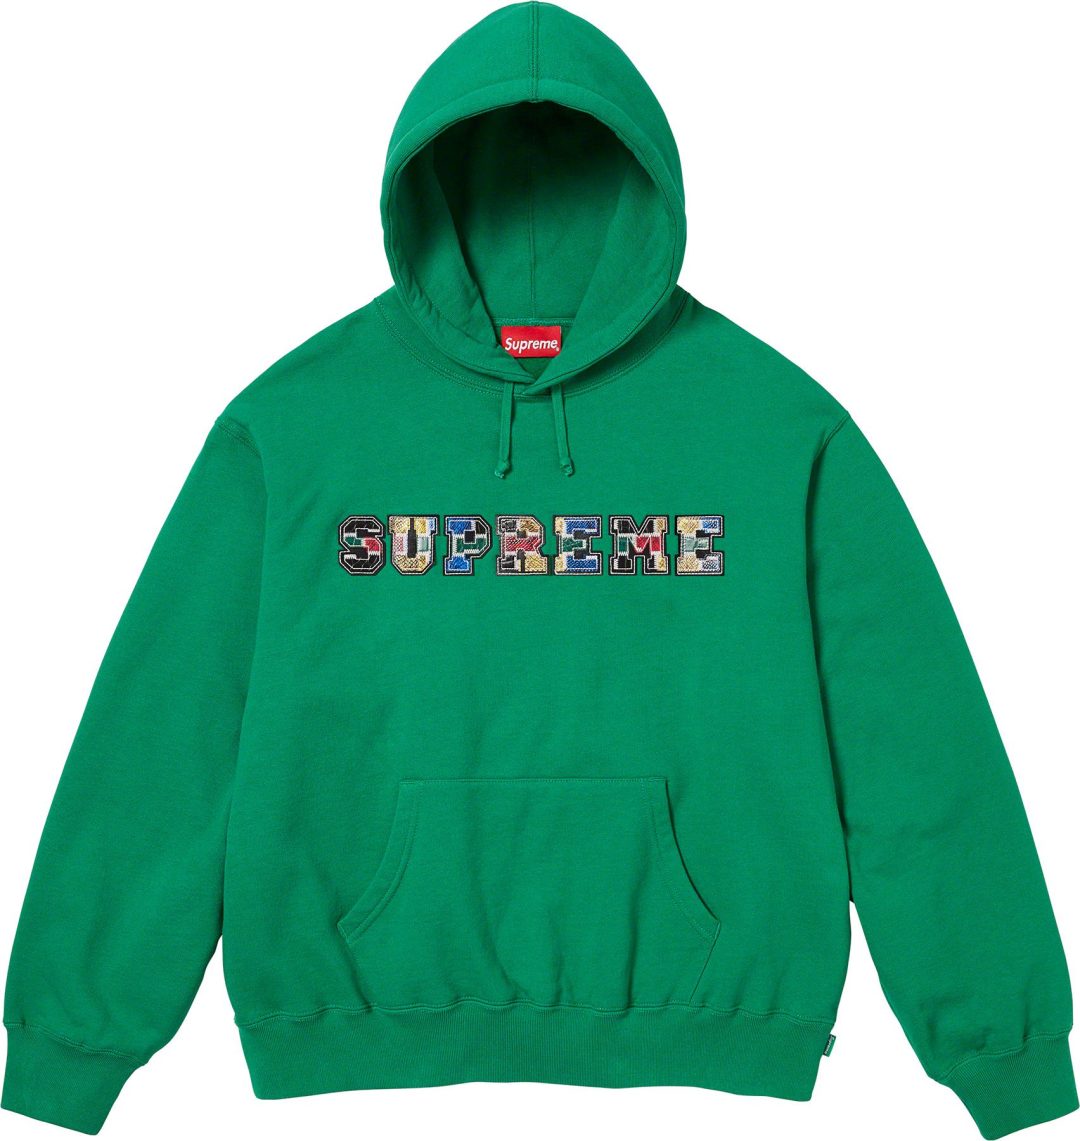 supreme-23fw-23aw-collegiate-patchwork-leather-hooded-sweatshirt